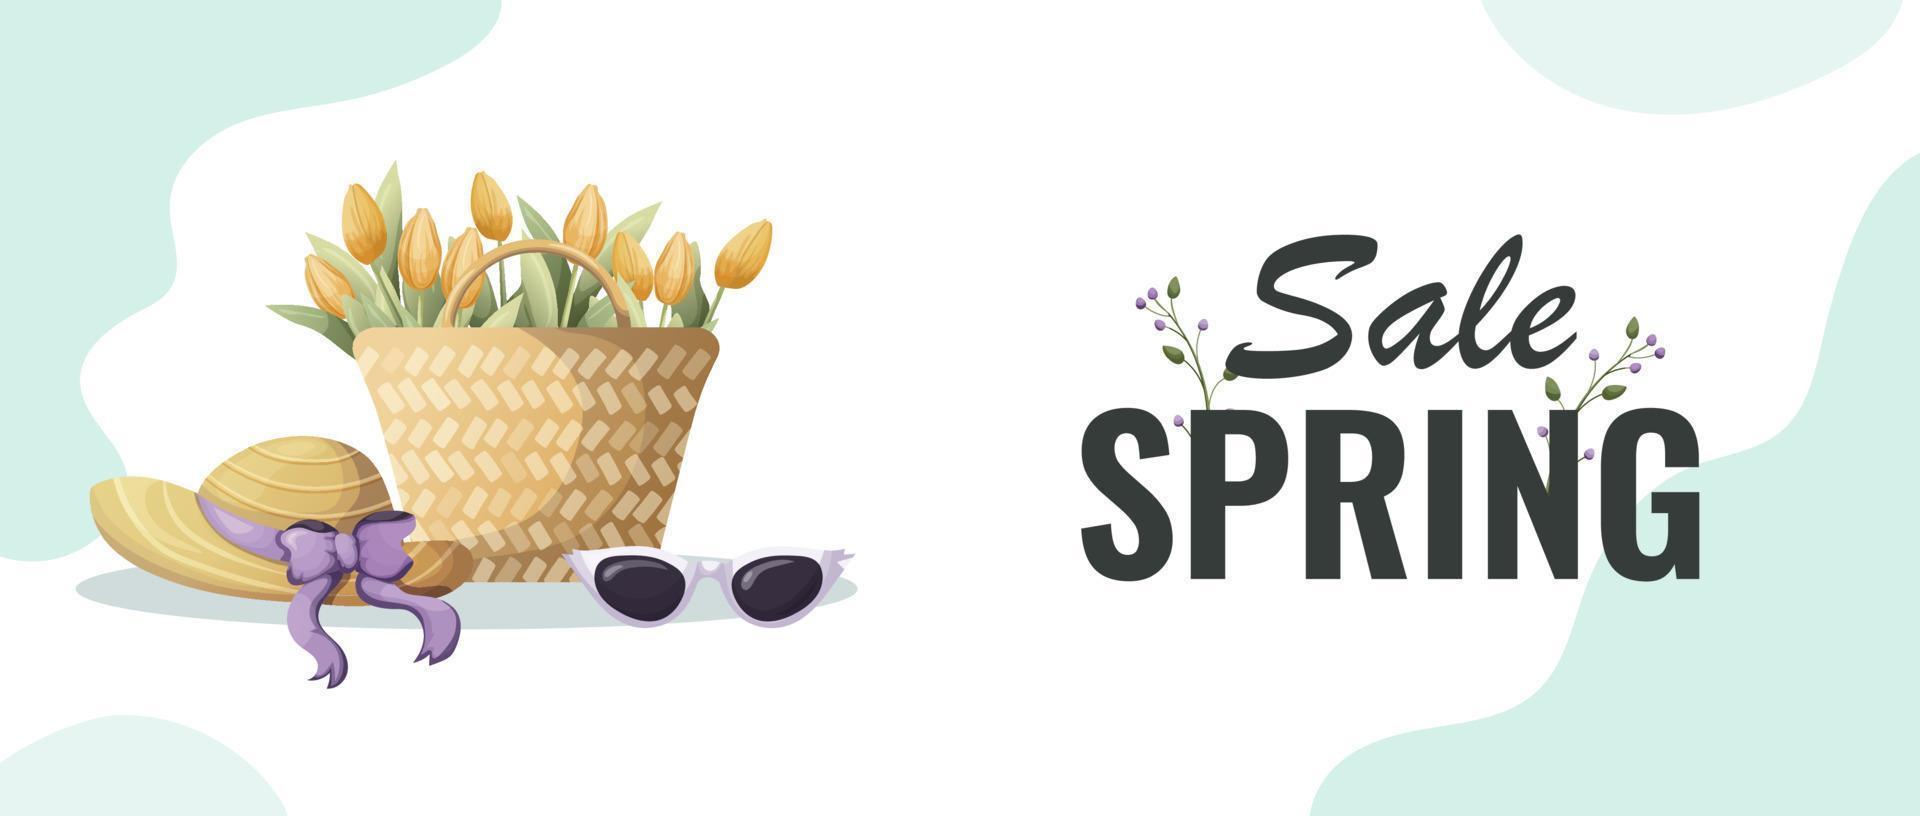 Fashion promotion banner template with floral elements. spring flowers, tulips, leaves. suitable for social networks, postcards, banners, web. vector